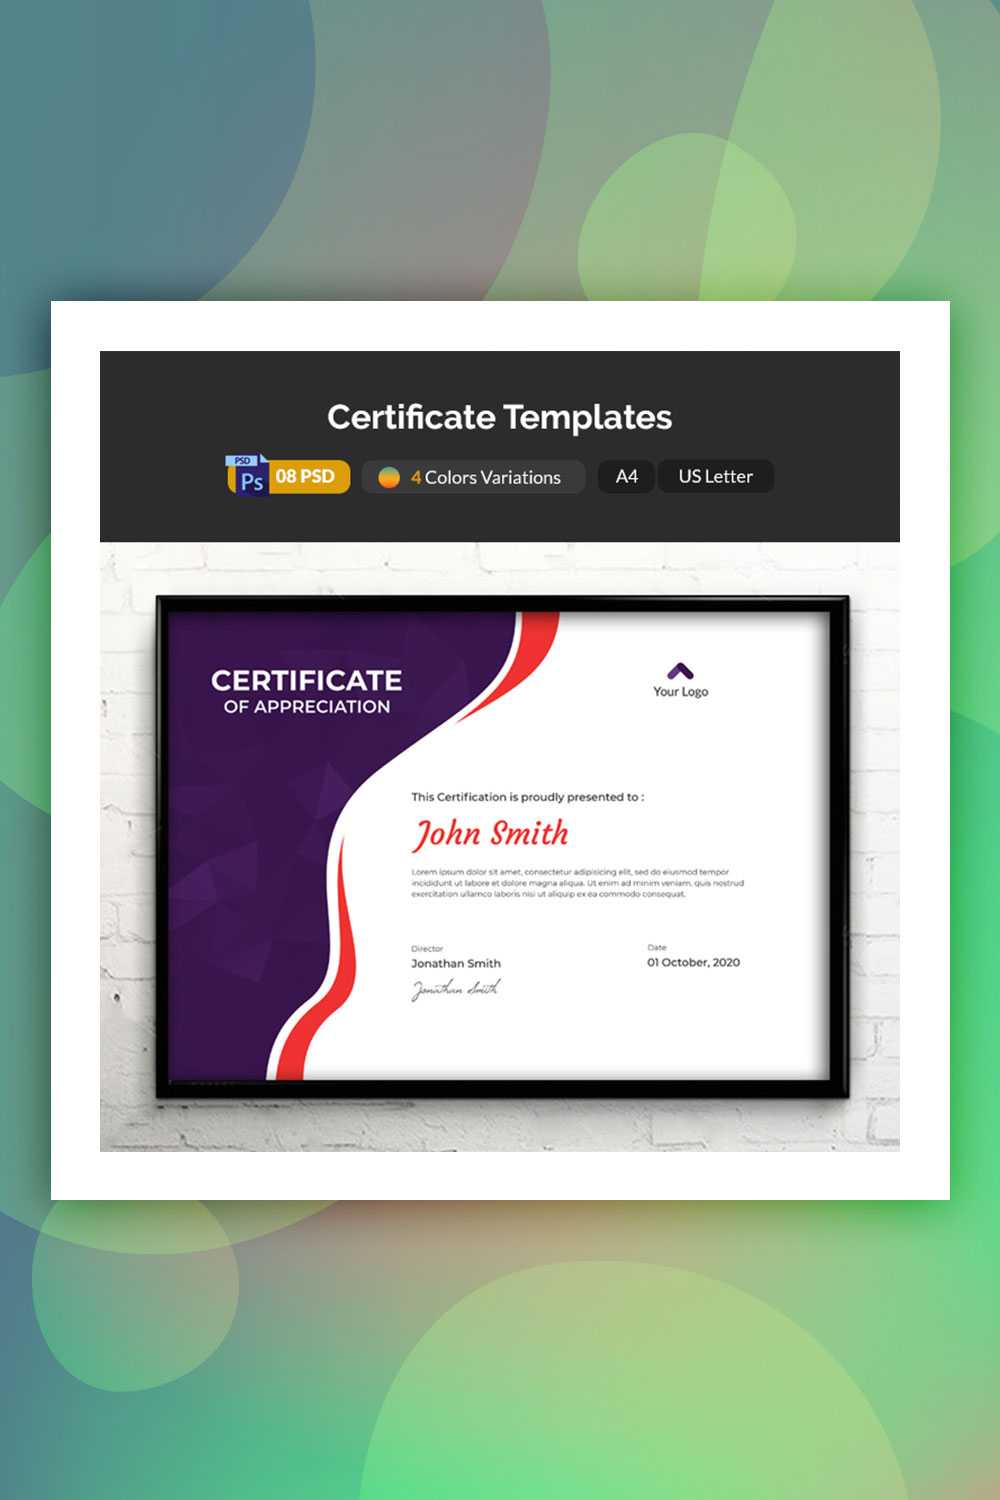 28 Attention Grabbing Certificate Templates – Colorlib Pertaining To No Certificate Templates Could Be Found